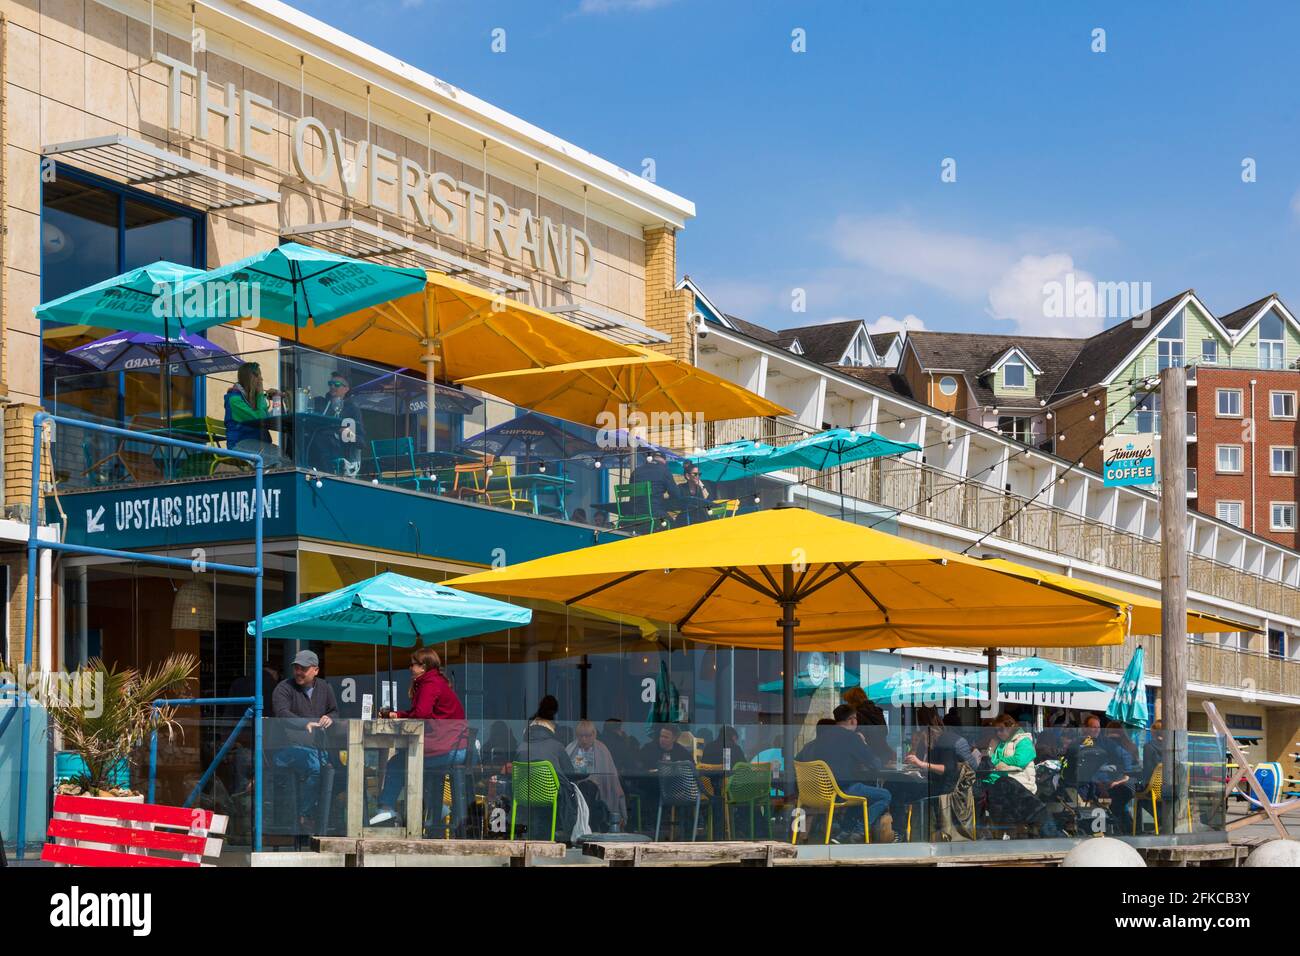 Bournemouth, Dorset UK. 30th April 2021. UK weather: after a sunny start, grey skies and rain at Bournemouth, as few visitors head to the seaside as the long Bank Holiday weekend approaches. Diners shelter from the rain at the Overstrand, Boscombe. Credit: Carolyn Jenkins/Alamy Live News Stock Photo